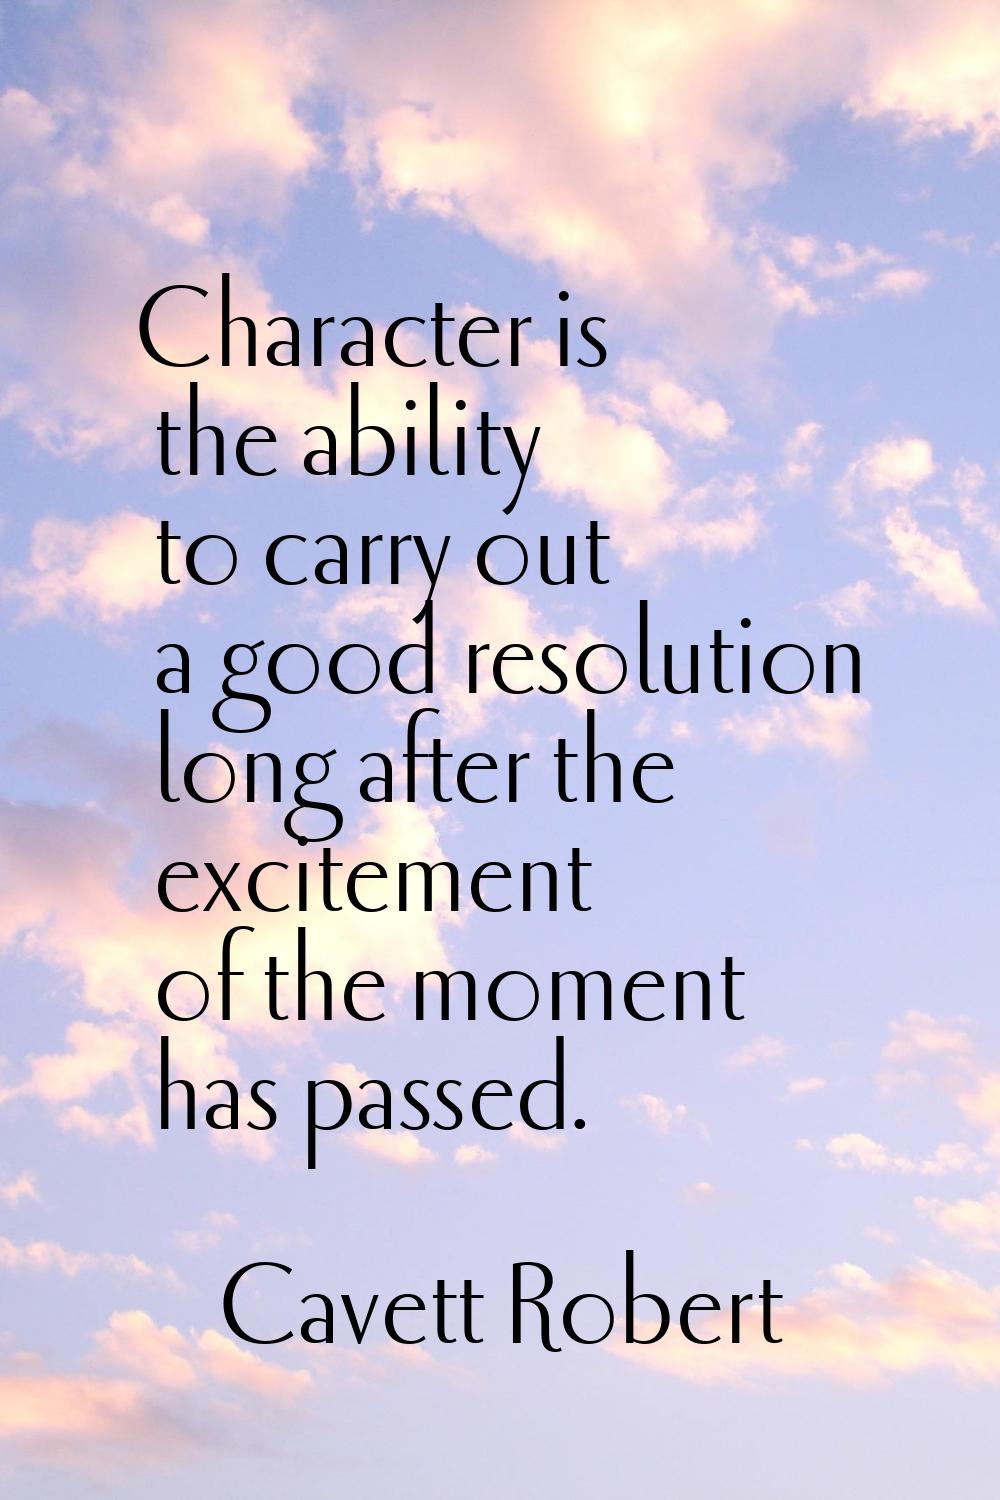 Character is the ability to carry out a good resolution long after the excitement of the moment has